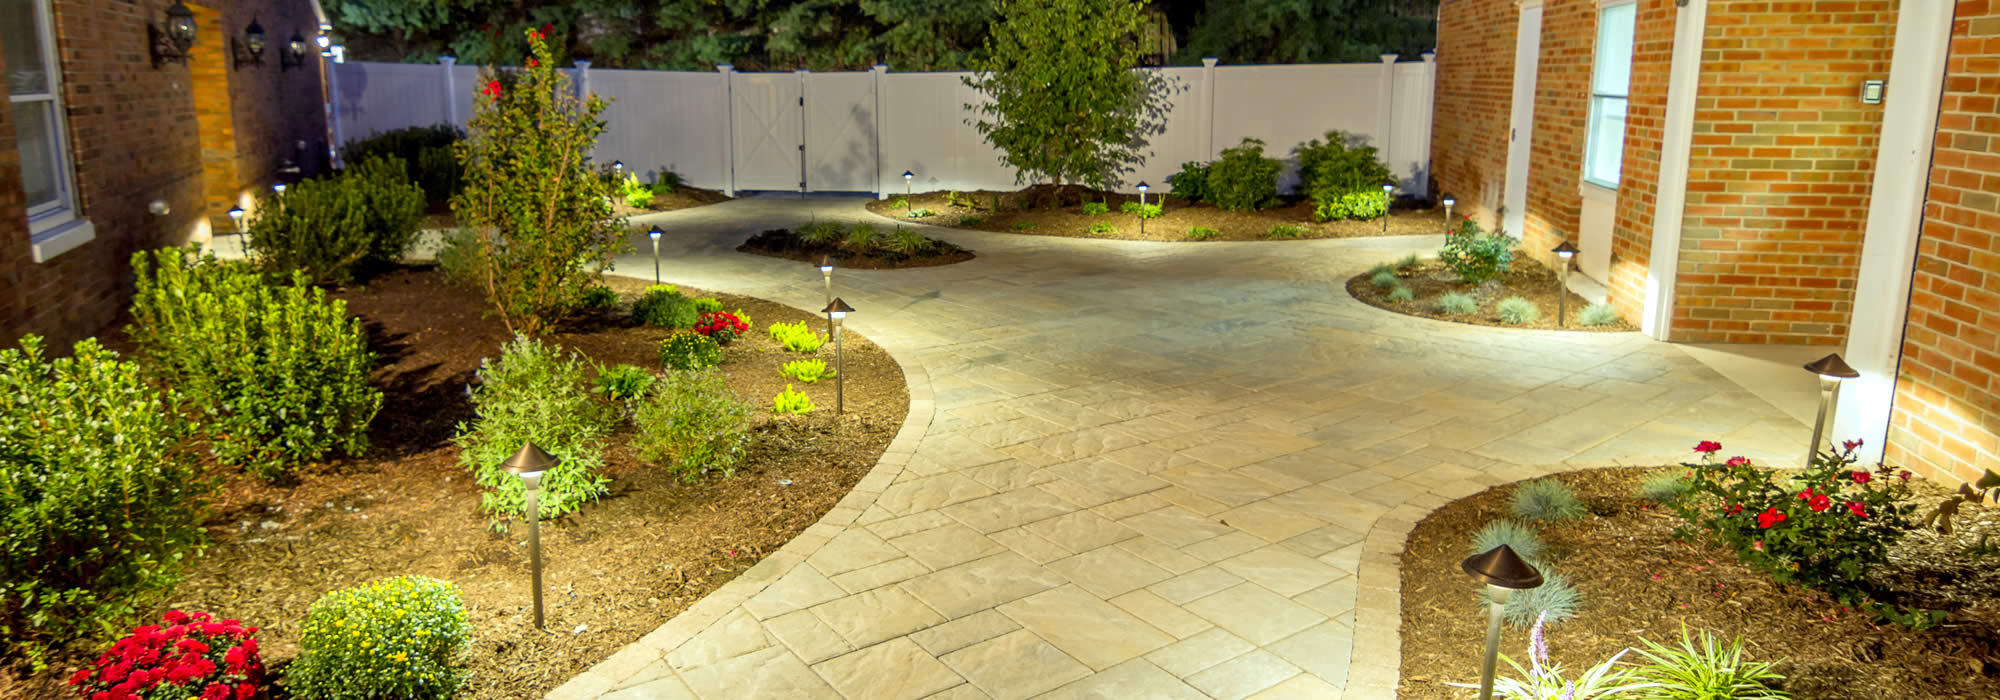 Landscaping Services in Marshall